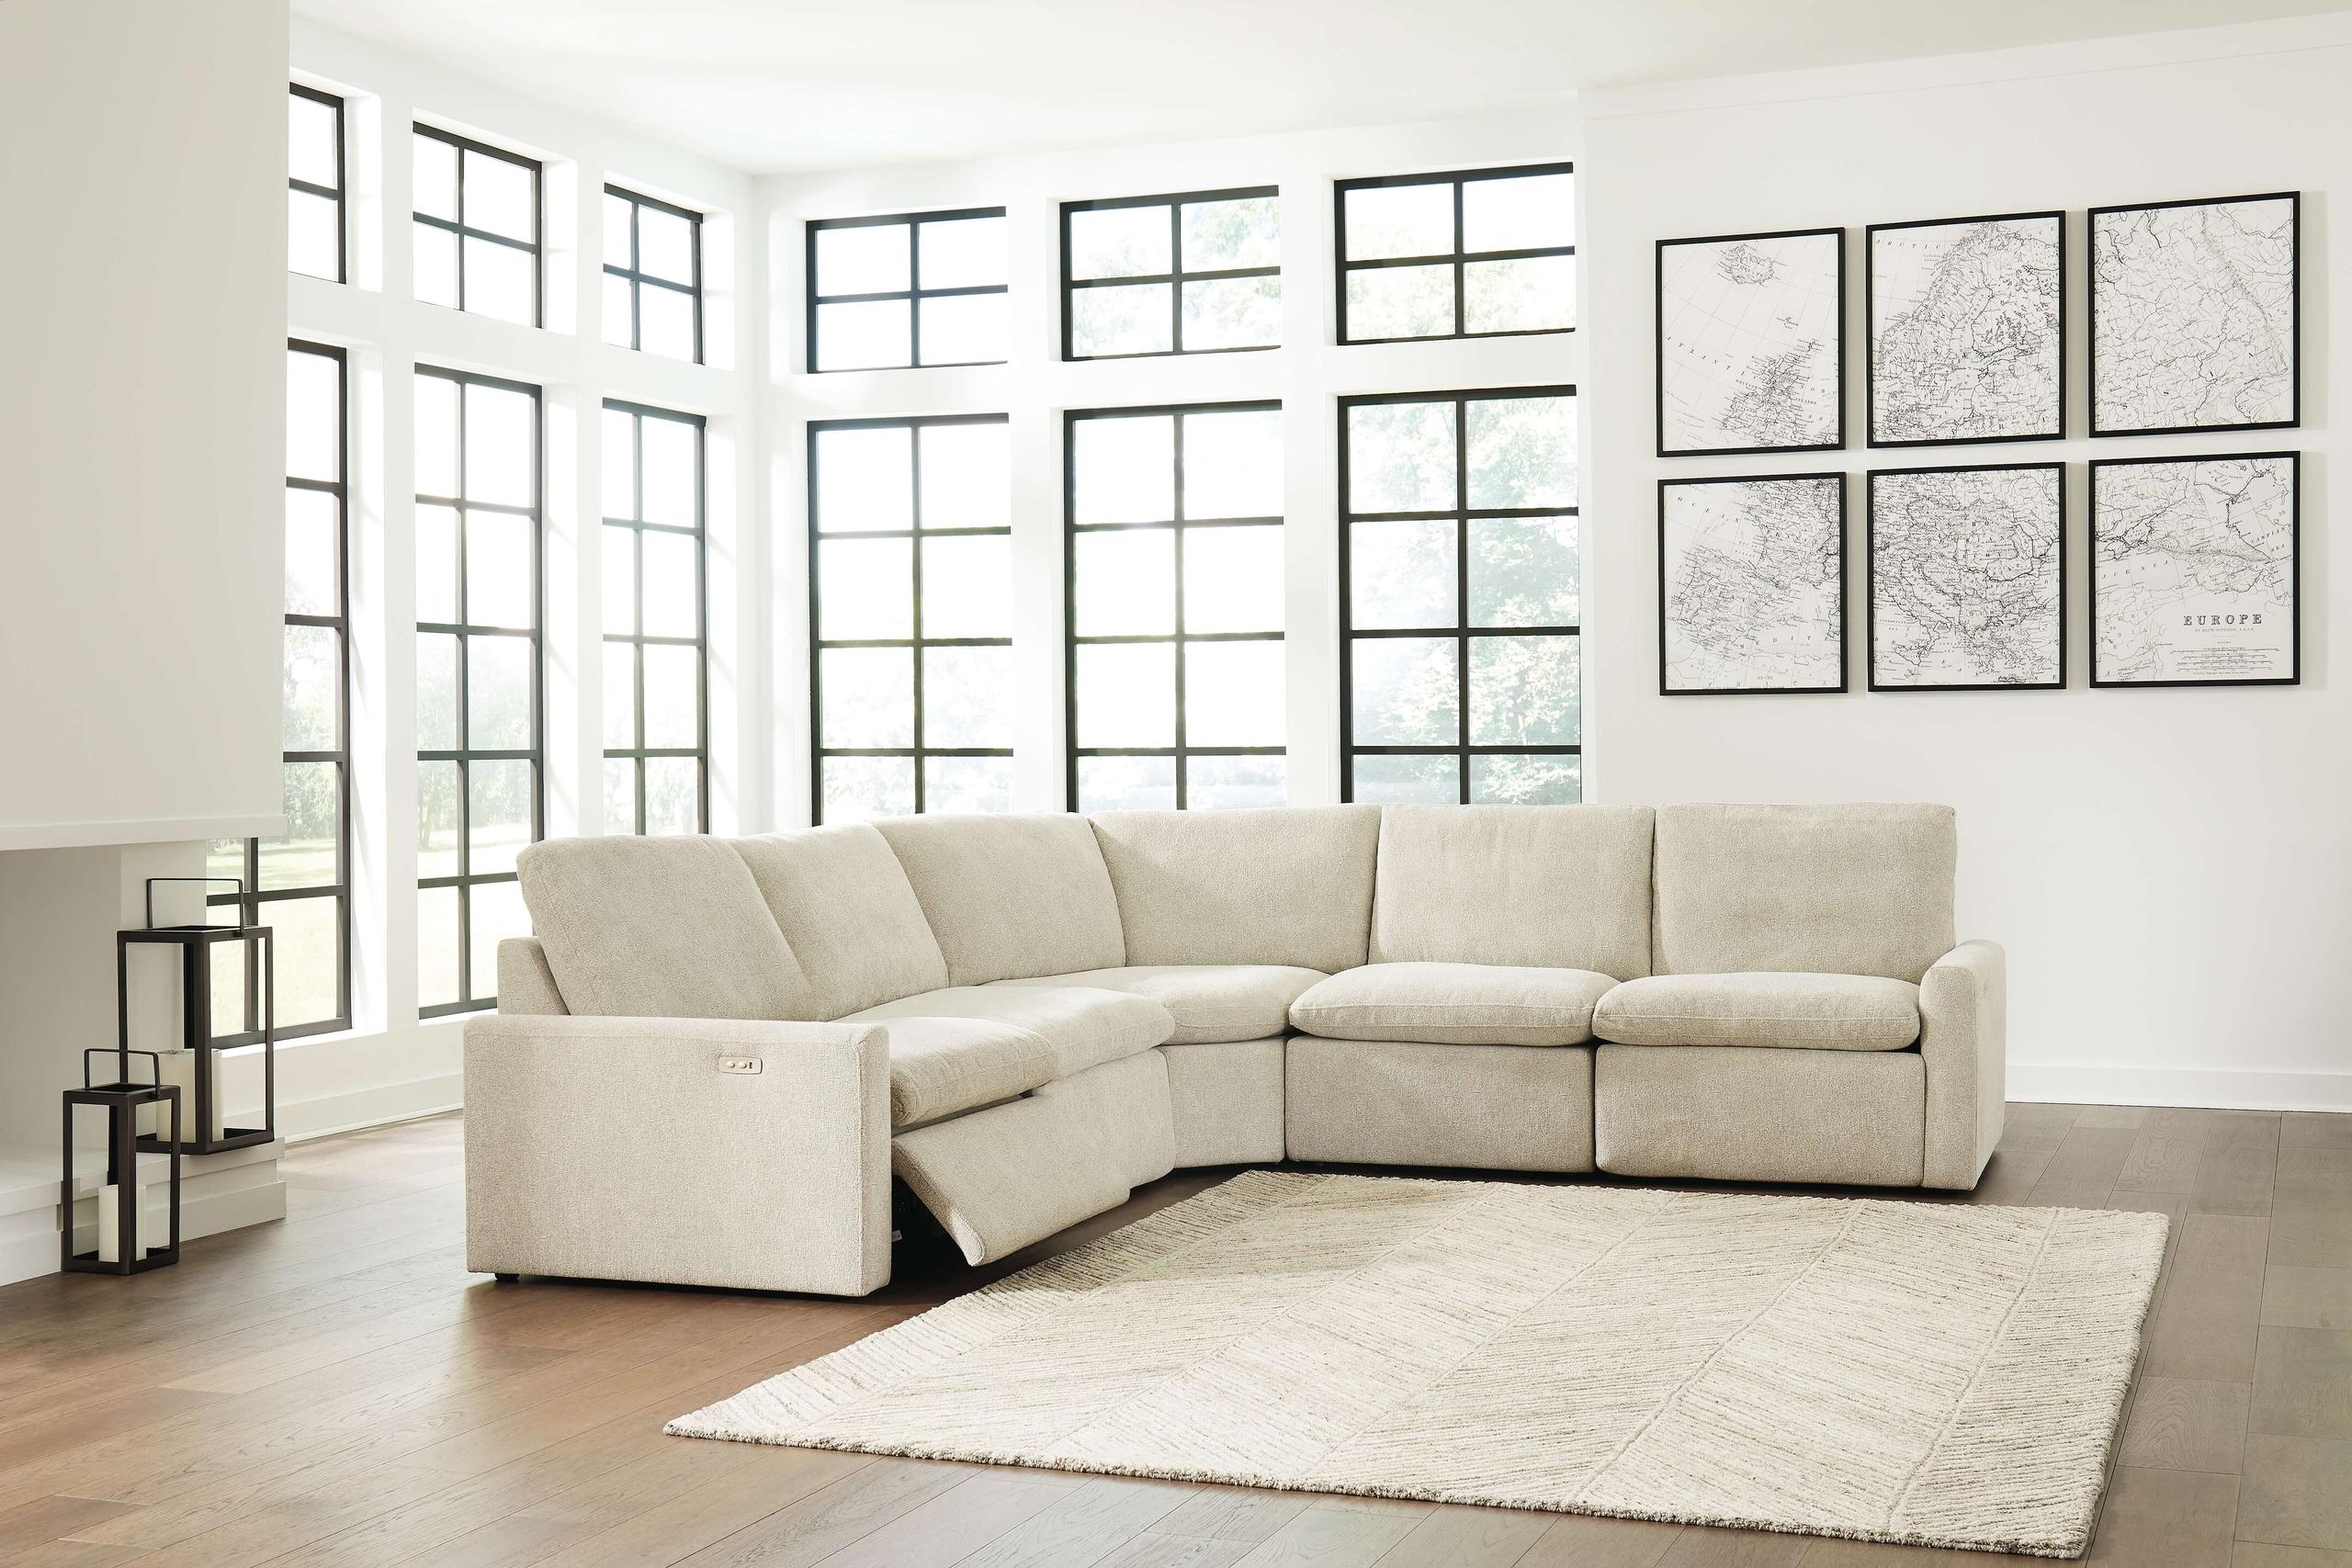 ASHLEY FURNITURE 60509S1 Hartsdale 5-piece Reclining Sectional